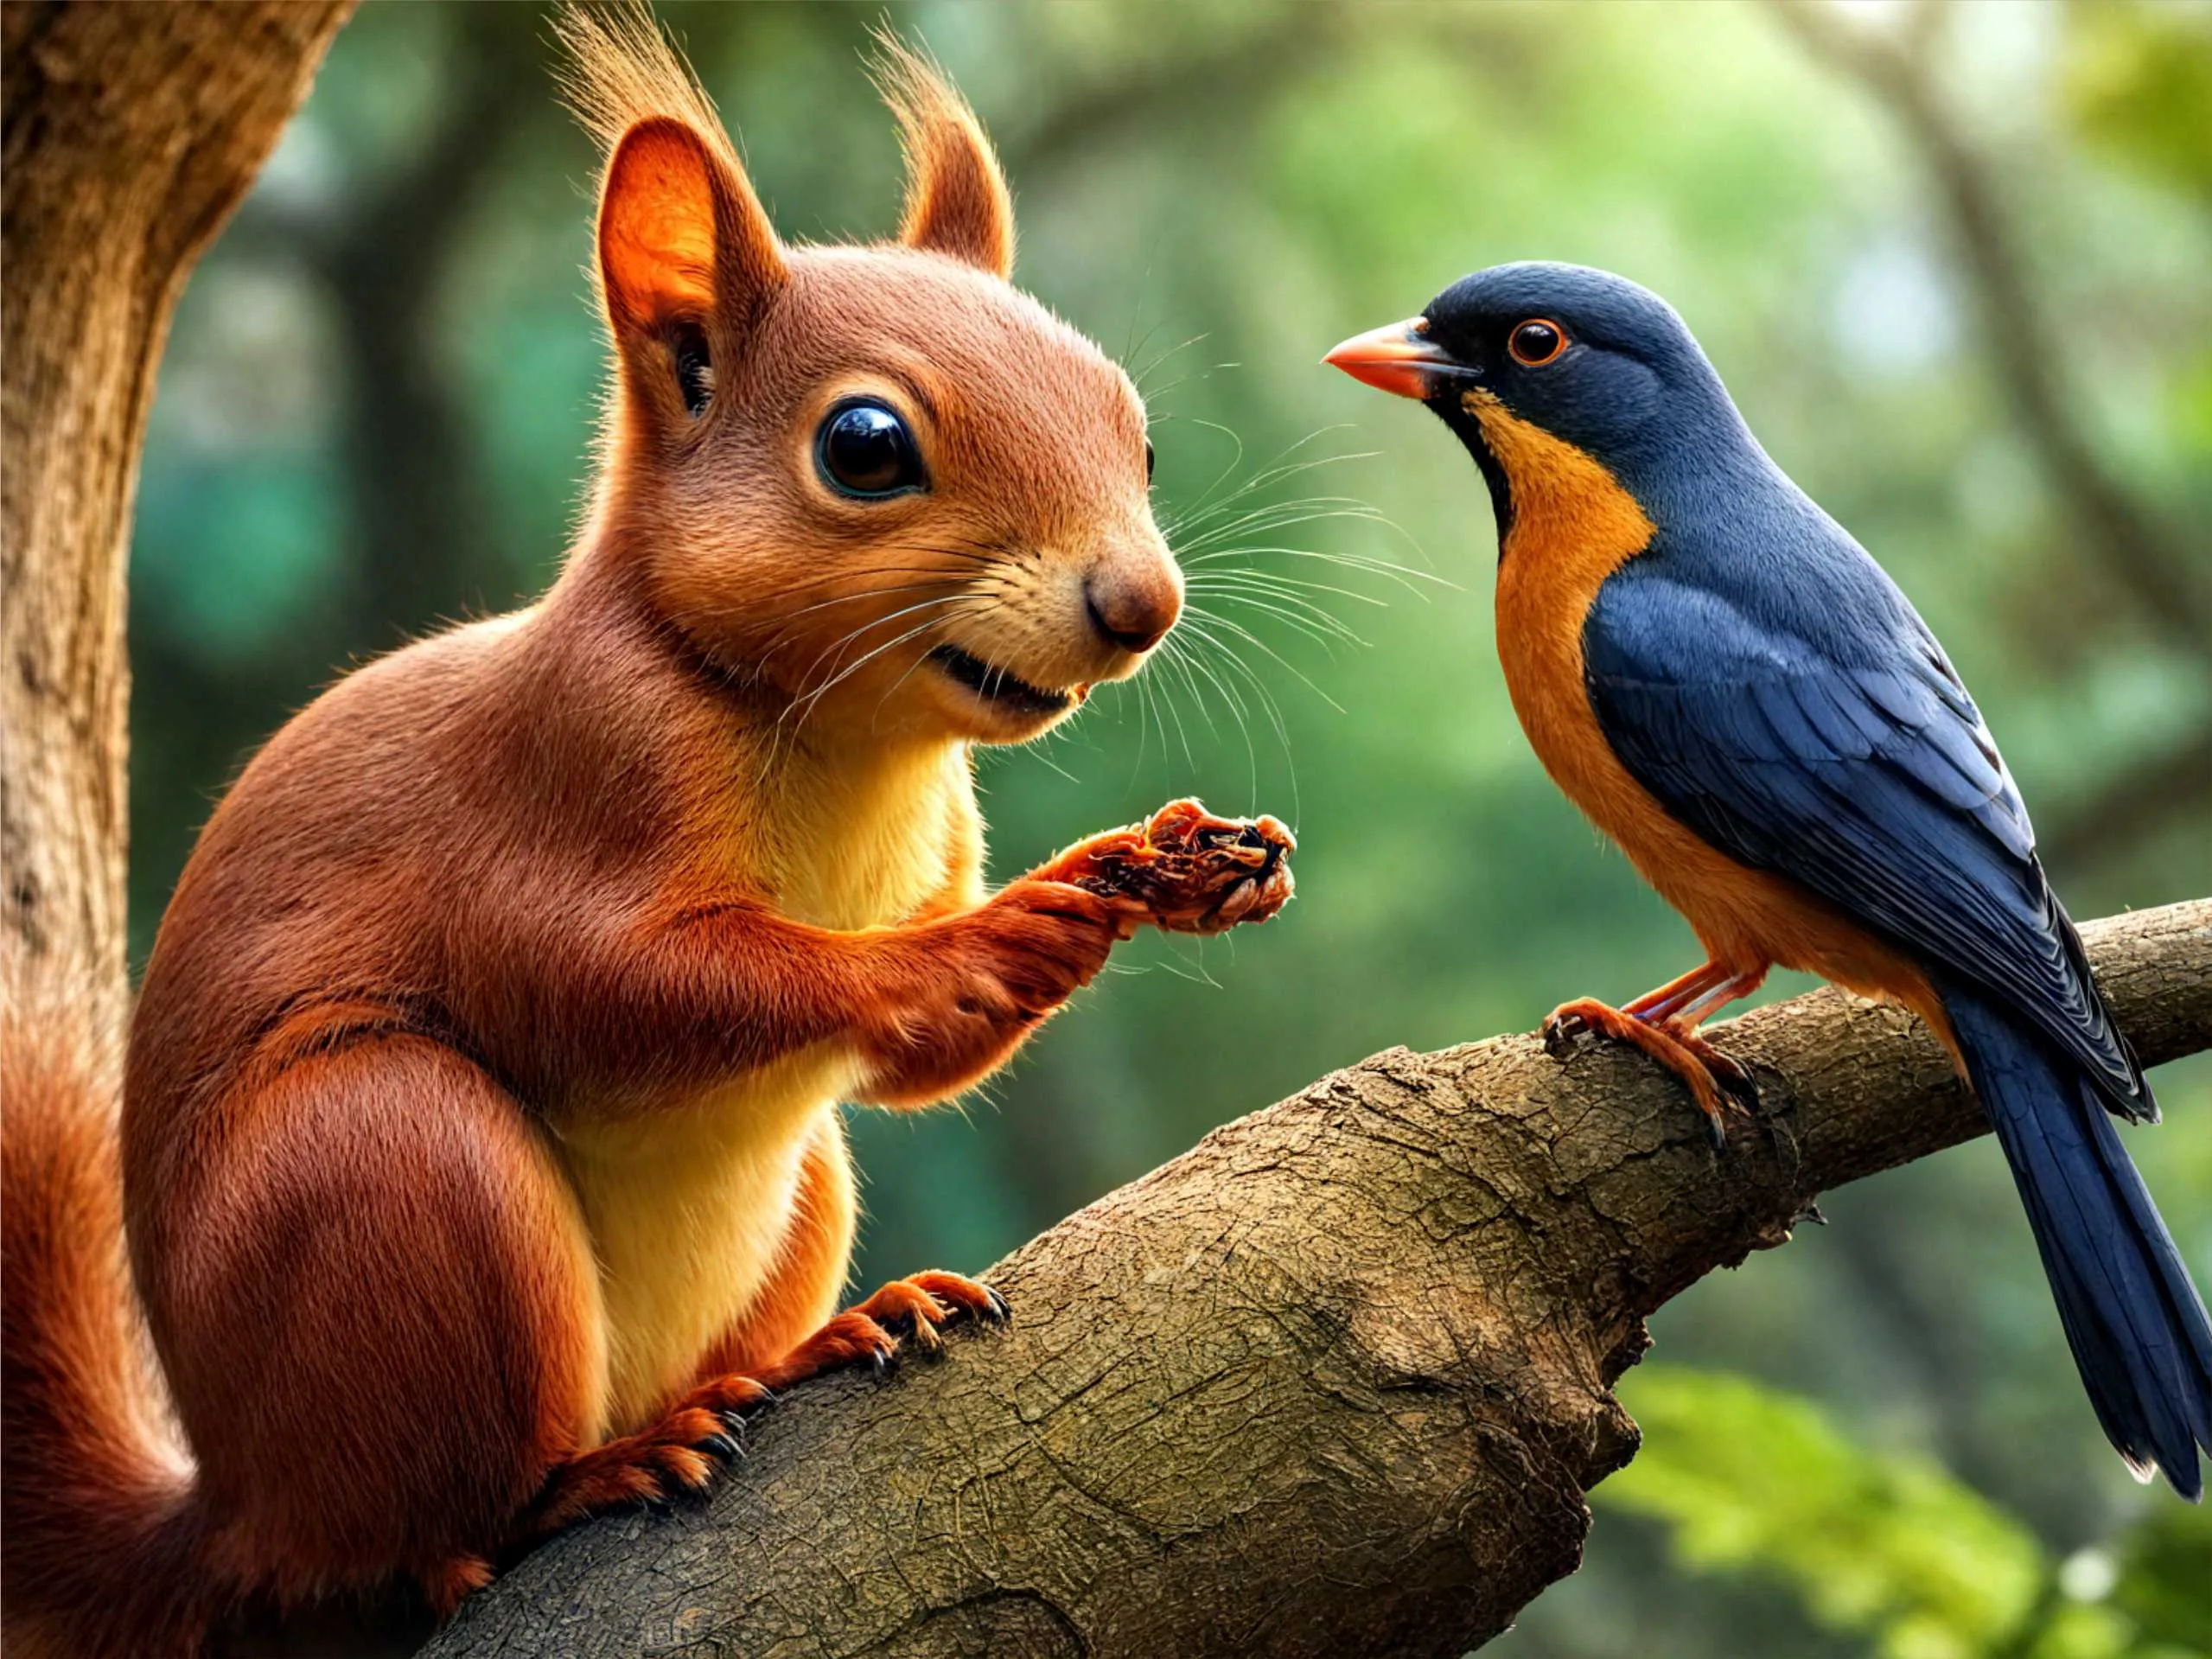 cartoon image of a squirrel in jungel talking to a bird